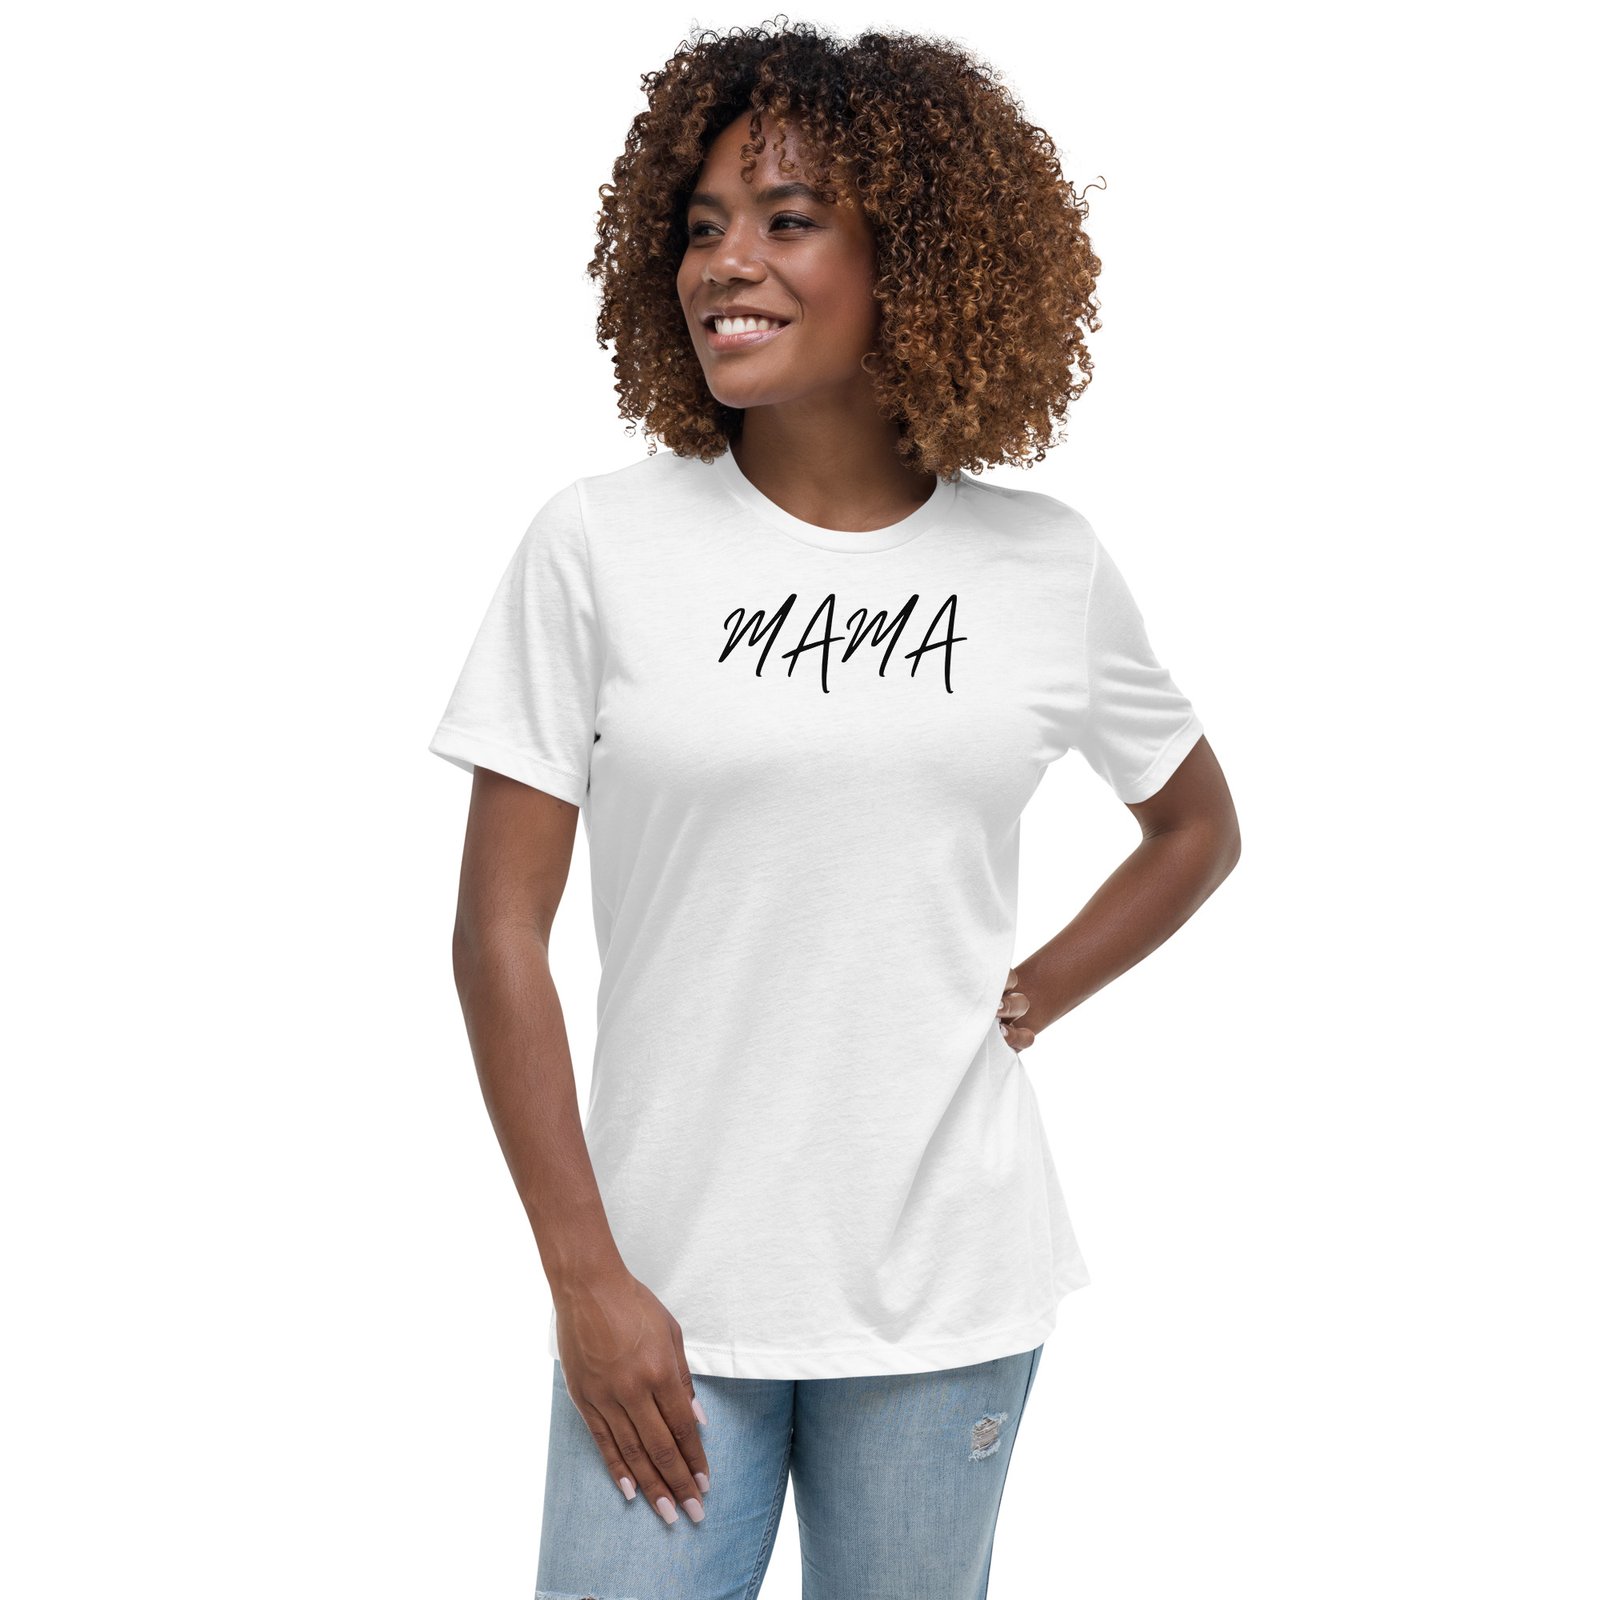 womens relaxed t shirt white front 65b03c4425784 - Mama Clothing Store - For Great Mamas